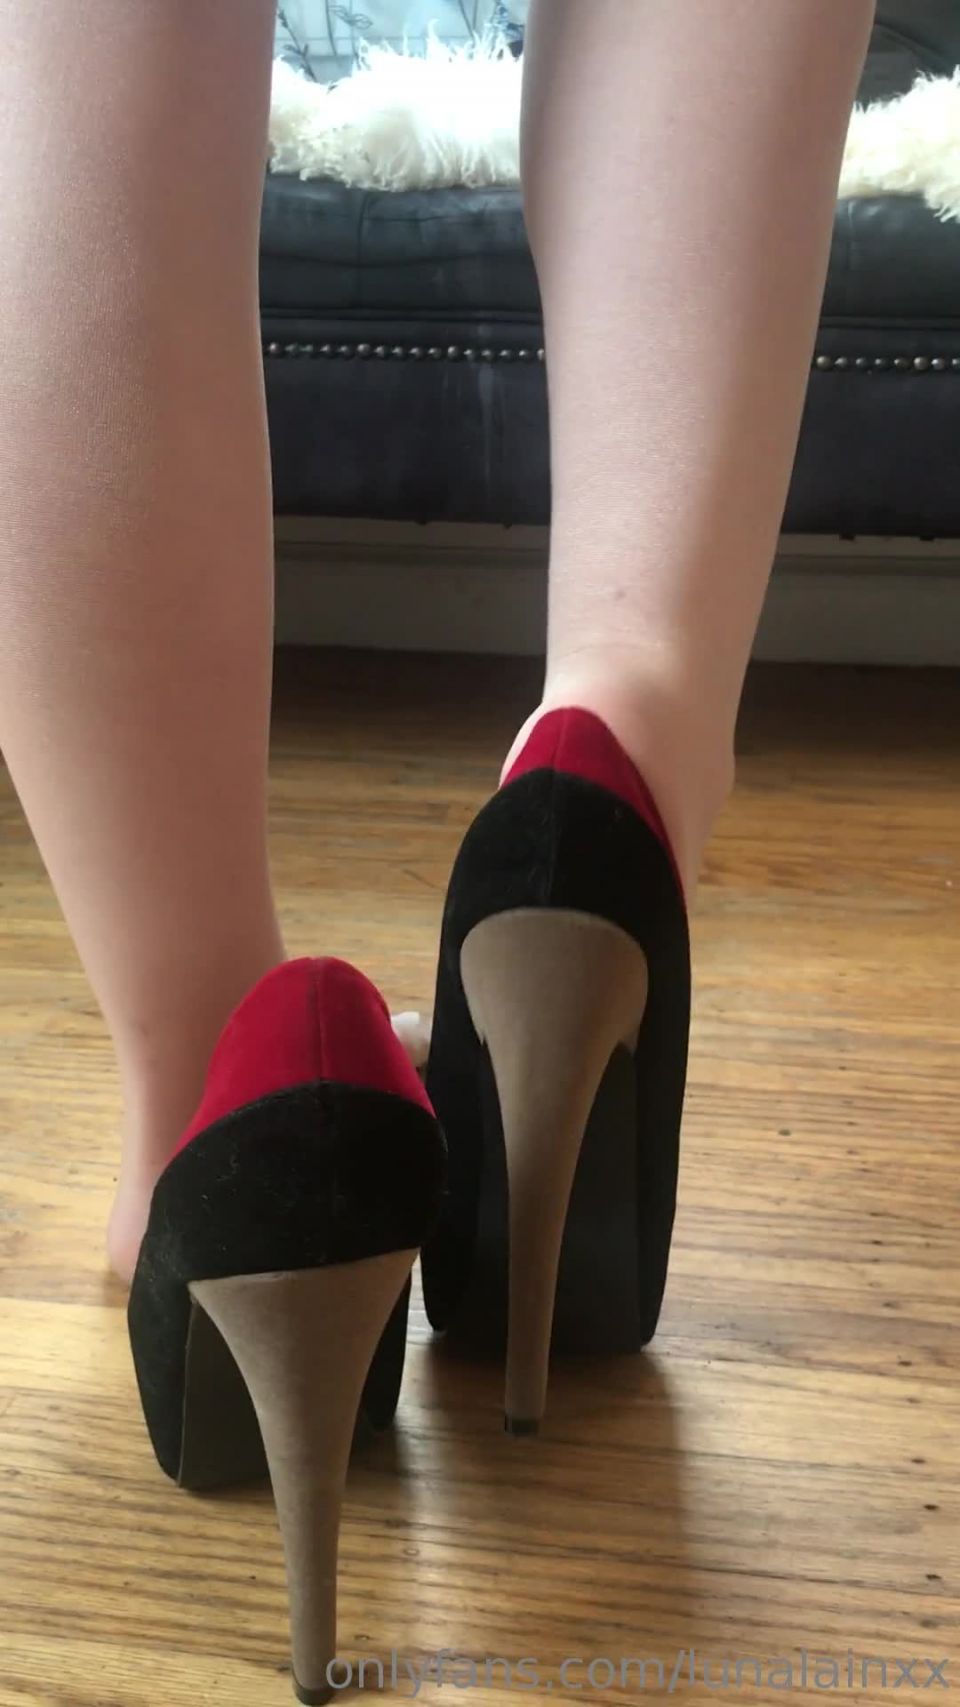 Luna Lain - lunalainxx () Lunalainxx - as one of you loves requested shoes feet heels 01-03-2019